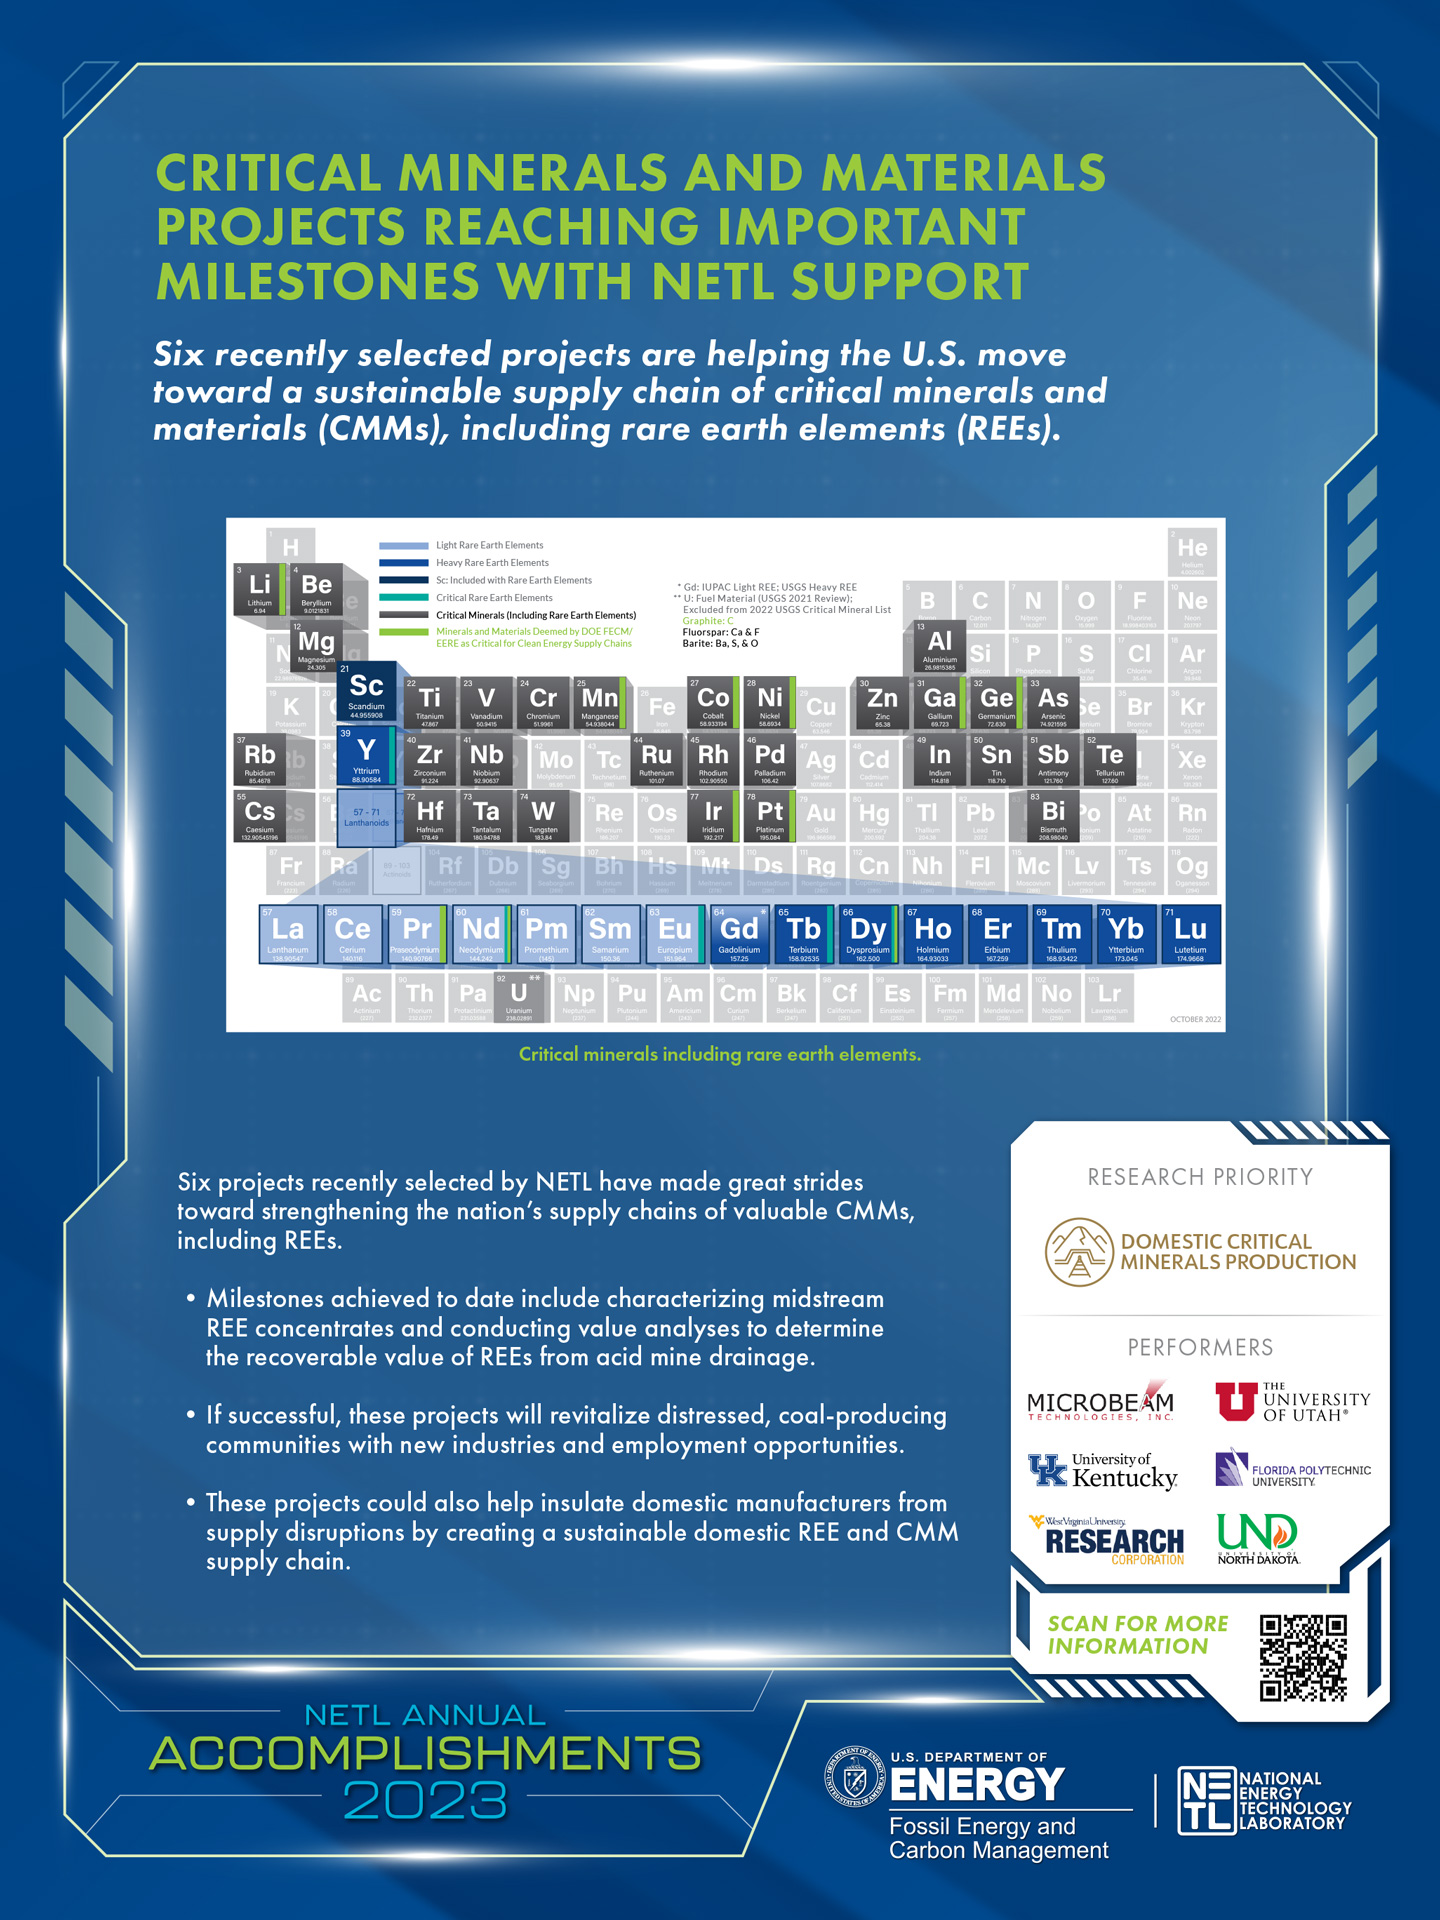 Critical Minerals and Materials Projects Reaching Important Milestones With NETL Support